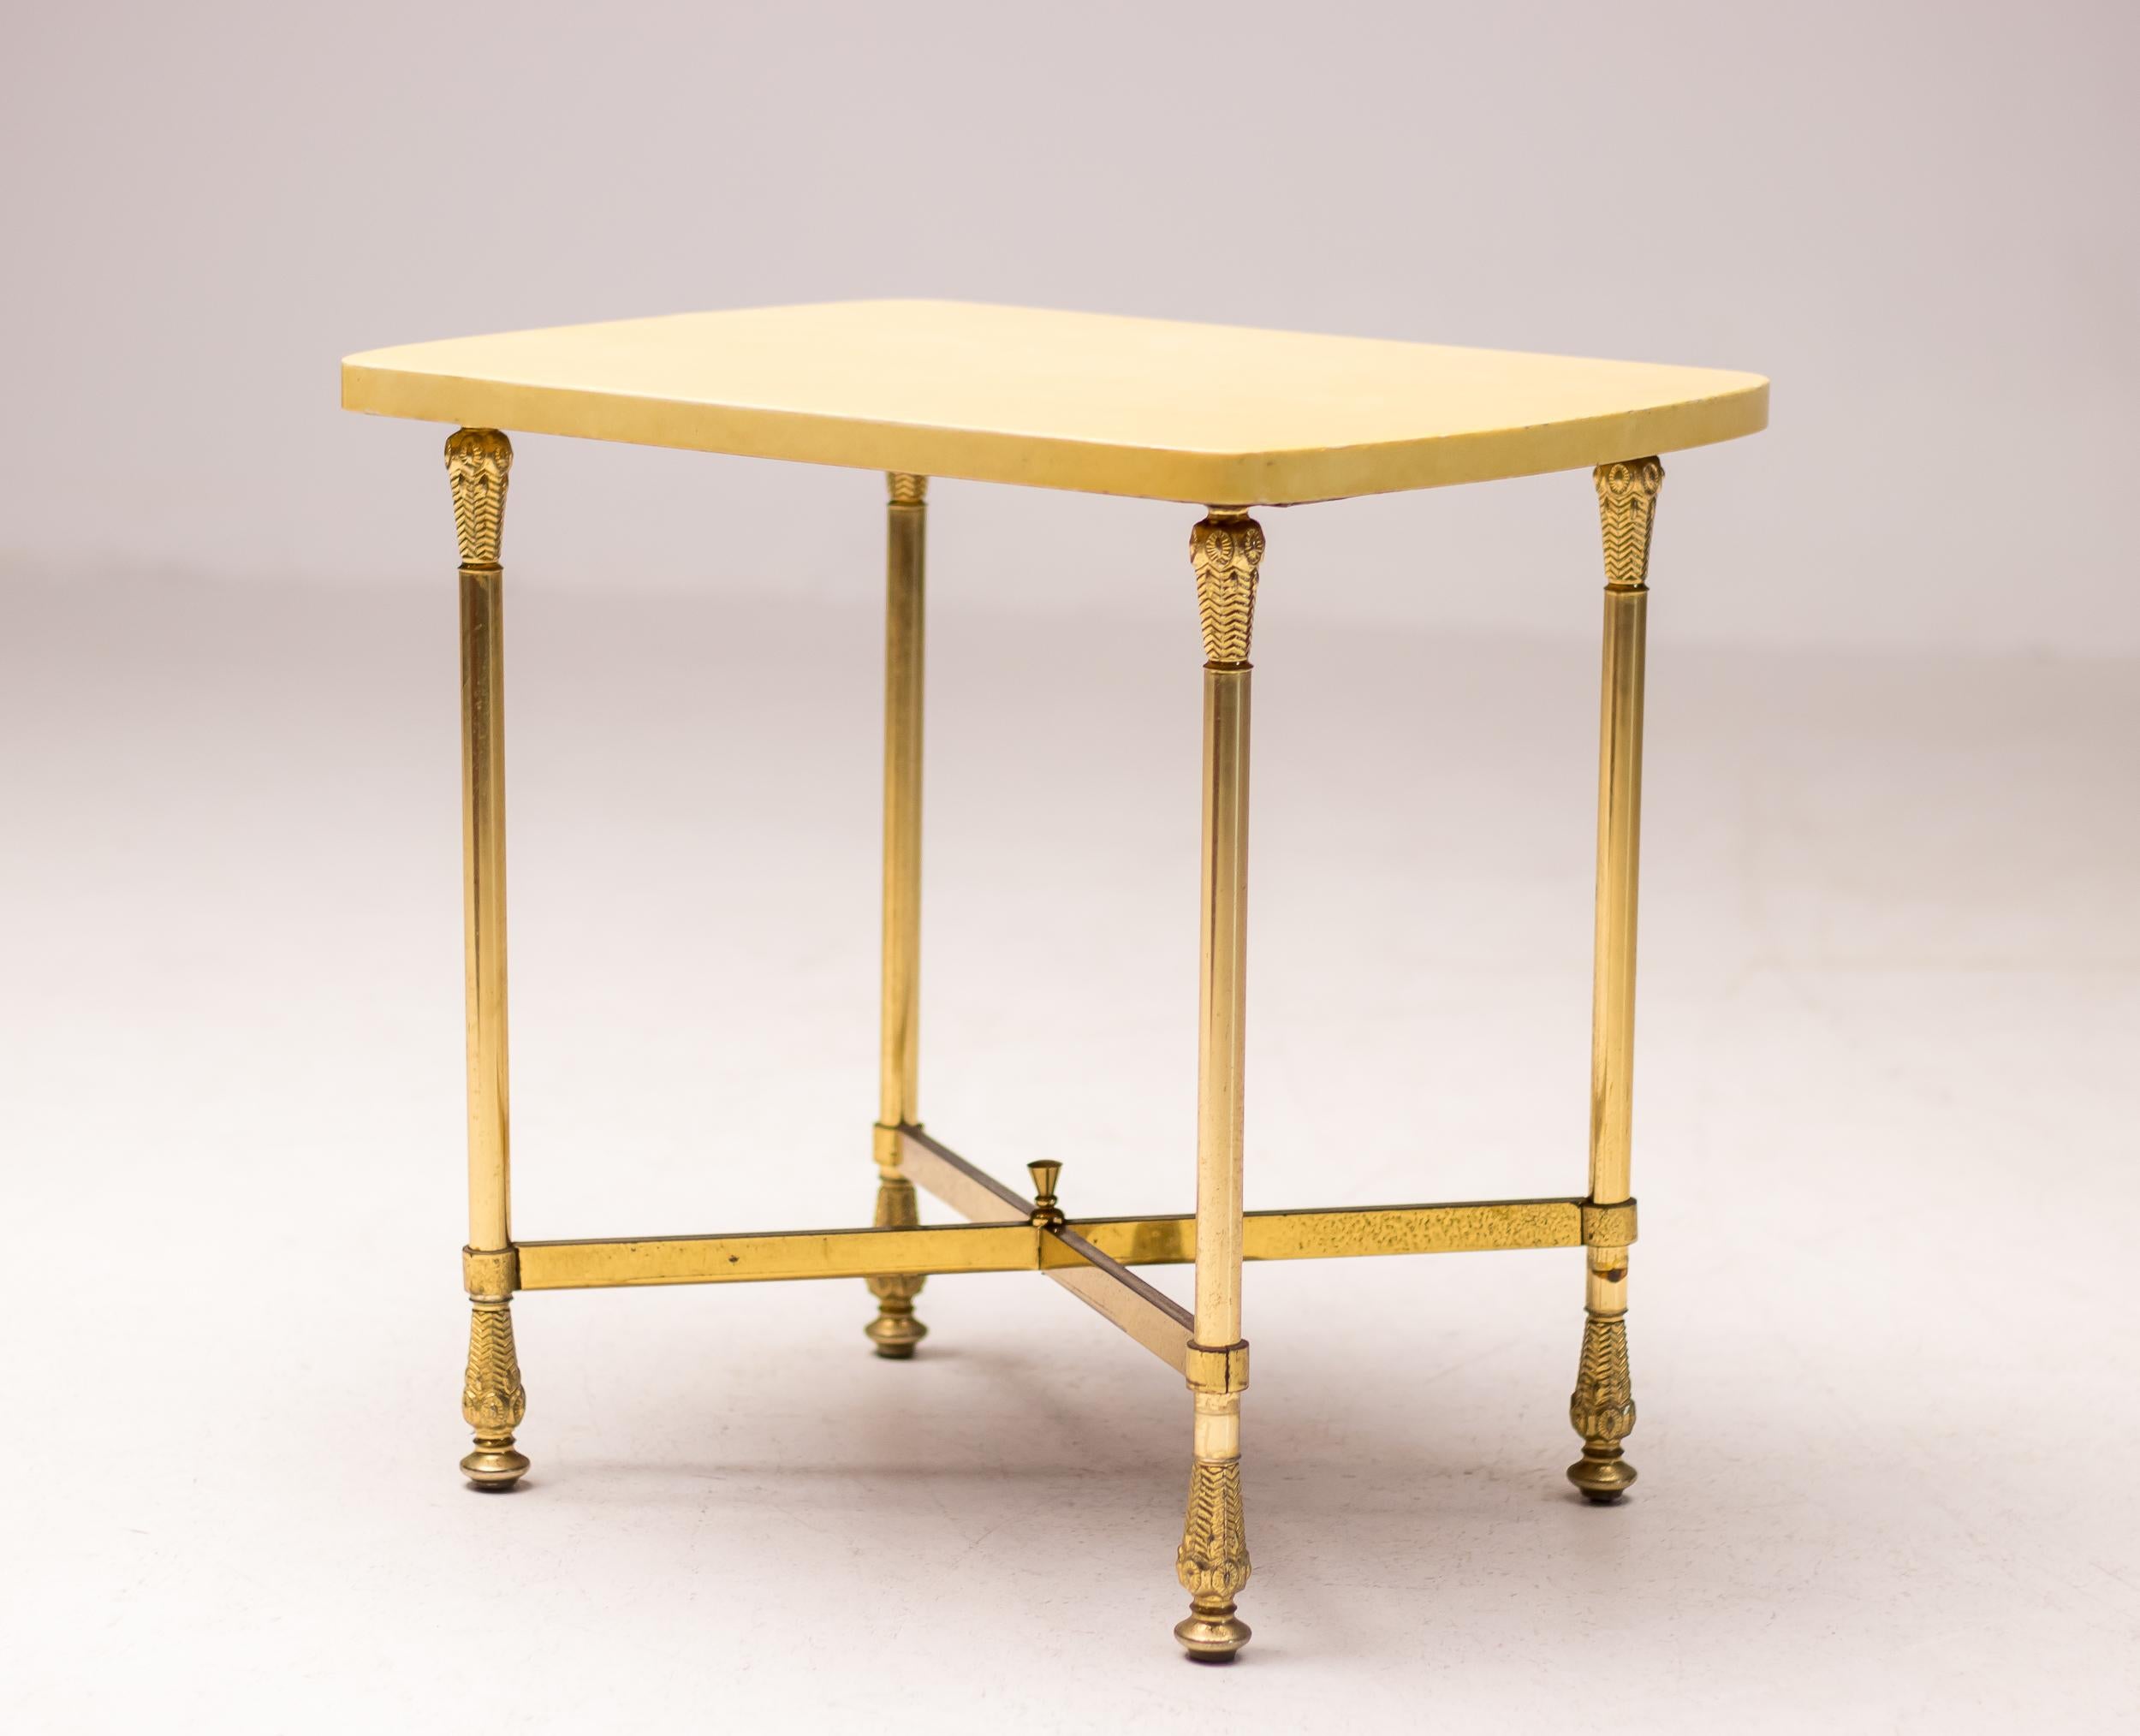 Wonderful side table designed by Aldo Tura, Italy, circa 1965.
Trademark lacquered goatskin parchment with legs in brass.
The superior craftsmanship is a hallmark of Aldo Tura.
Most 'attributed to Aldo Tura' items on the market are not labeled.
An